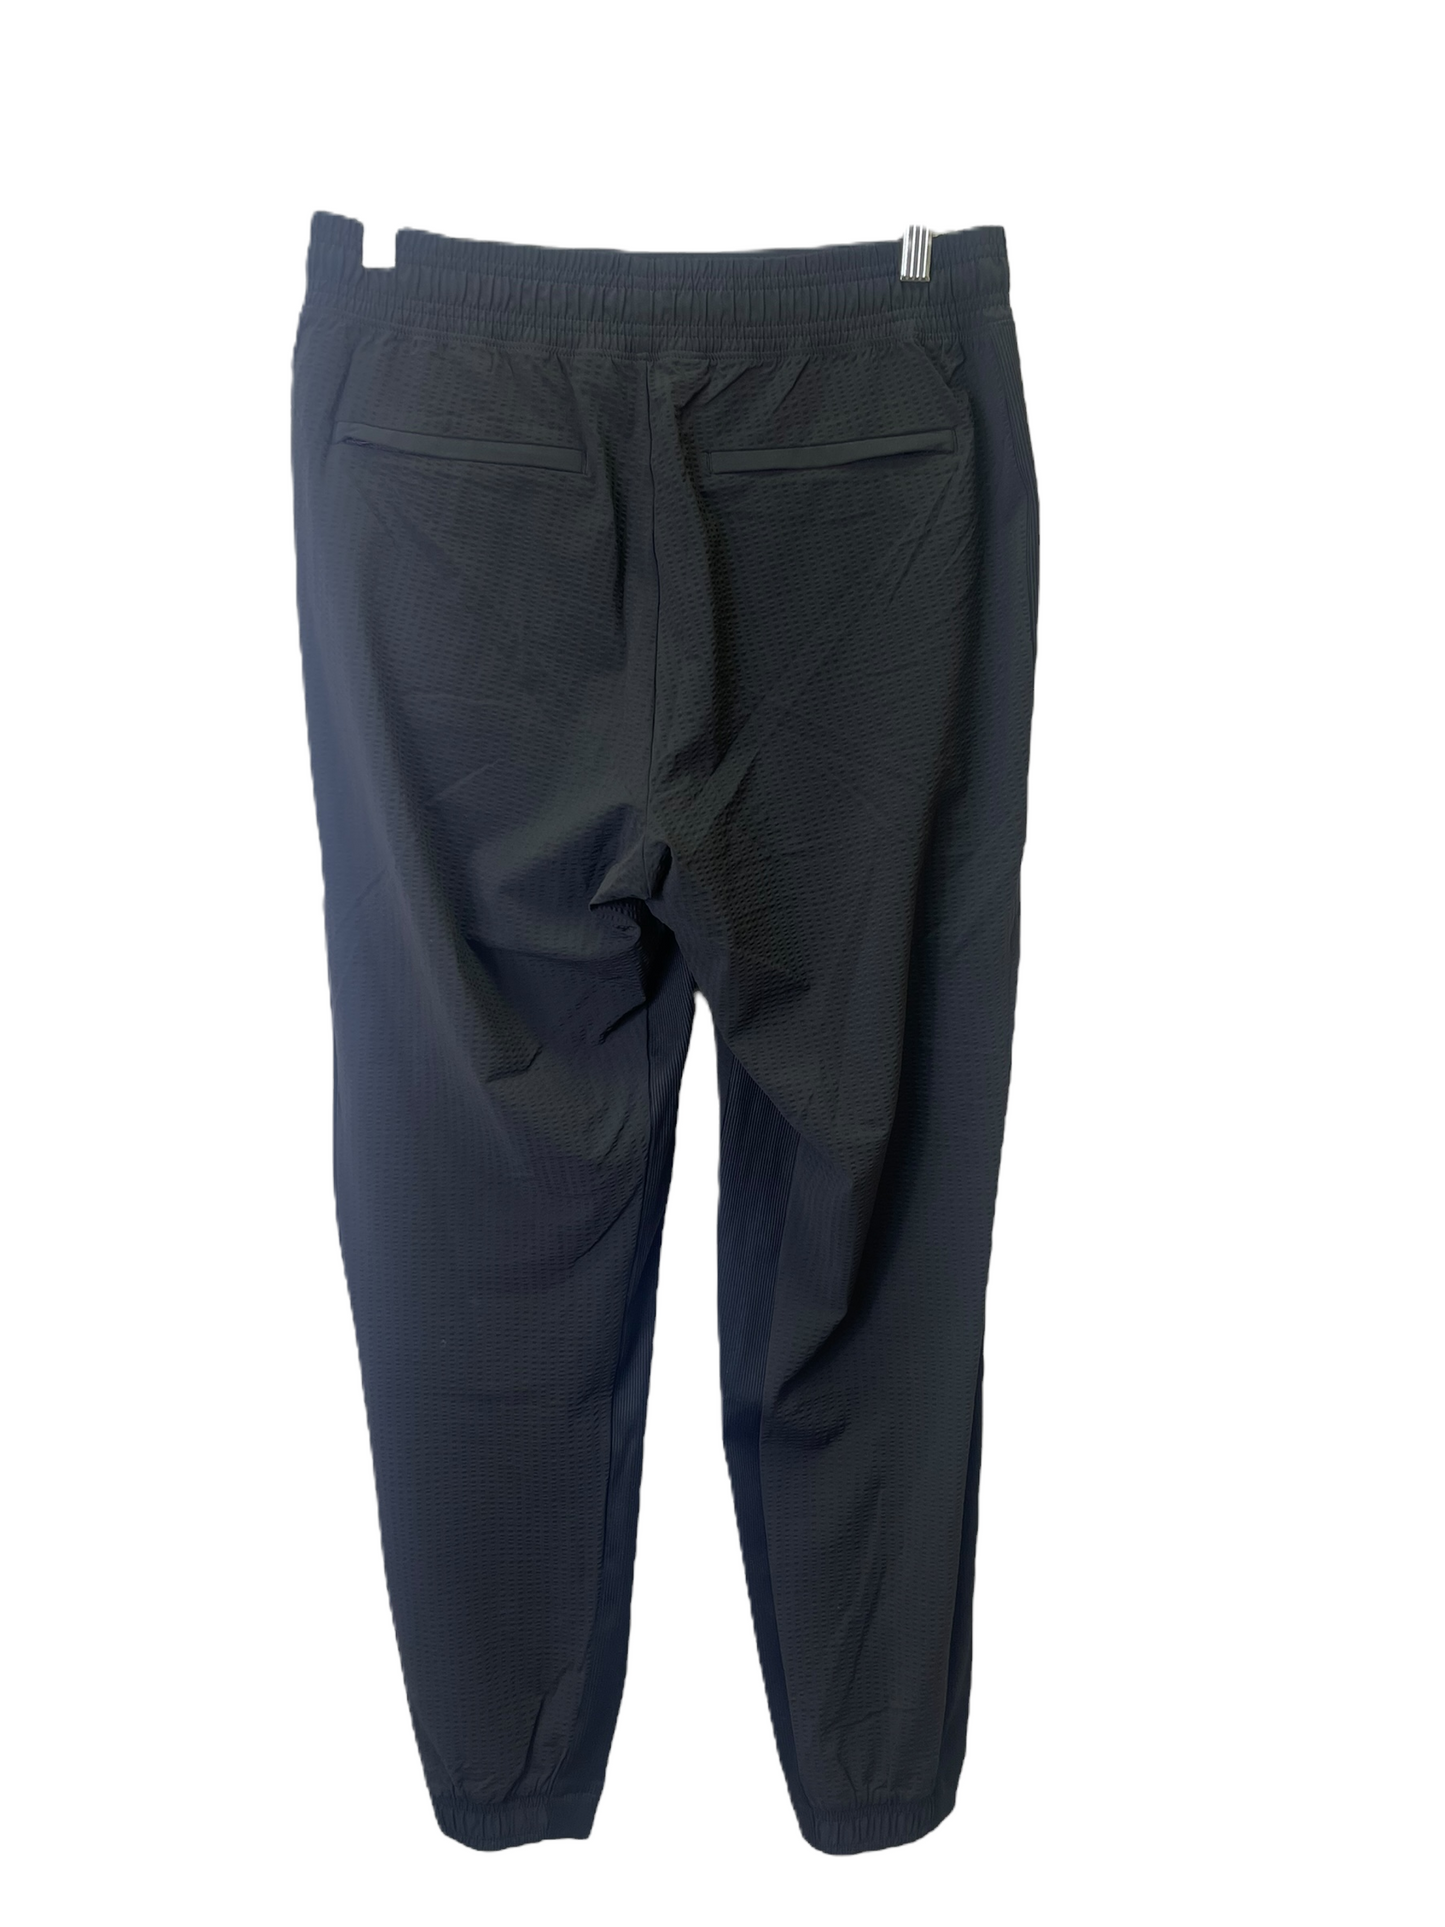 Athletic Pants By Athleta  Size: M